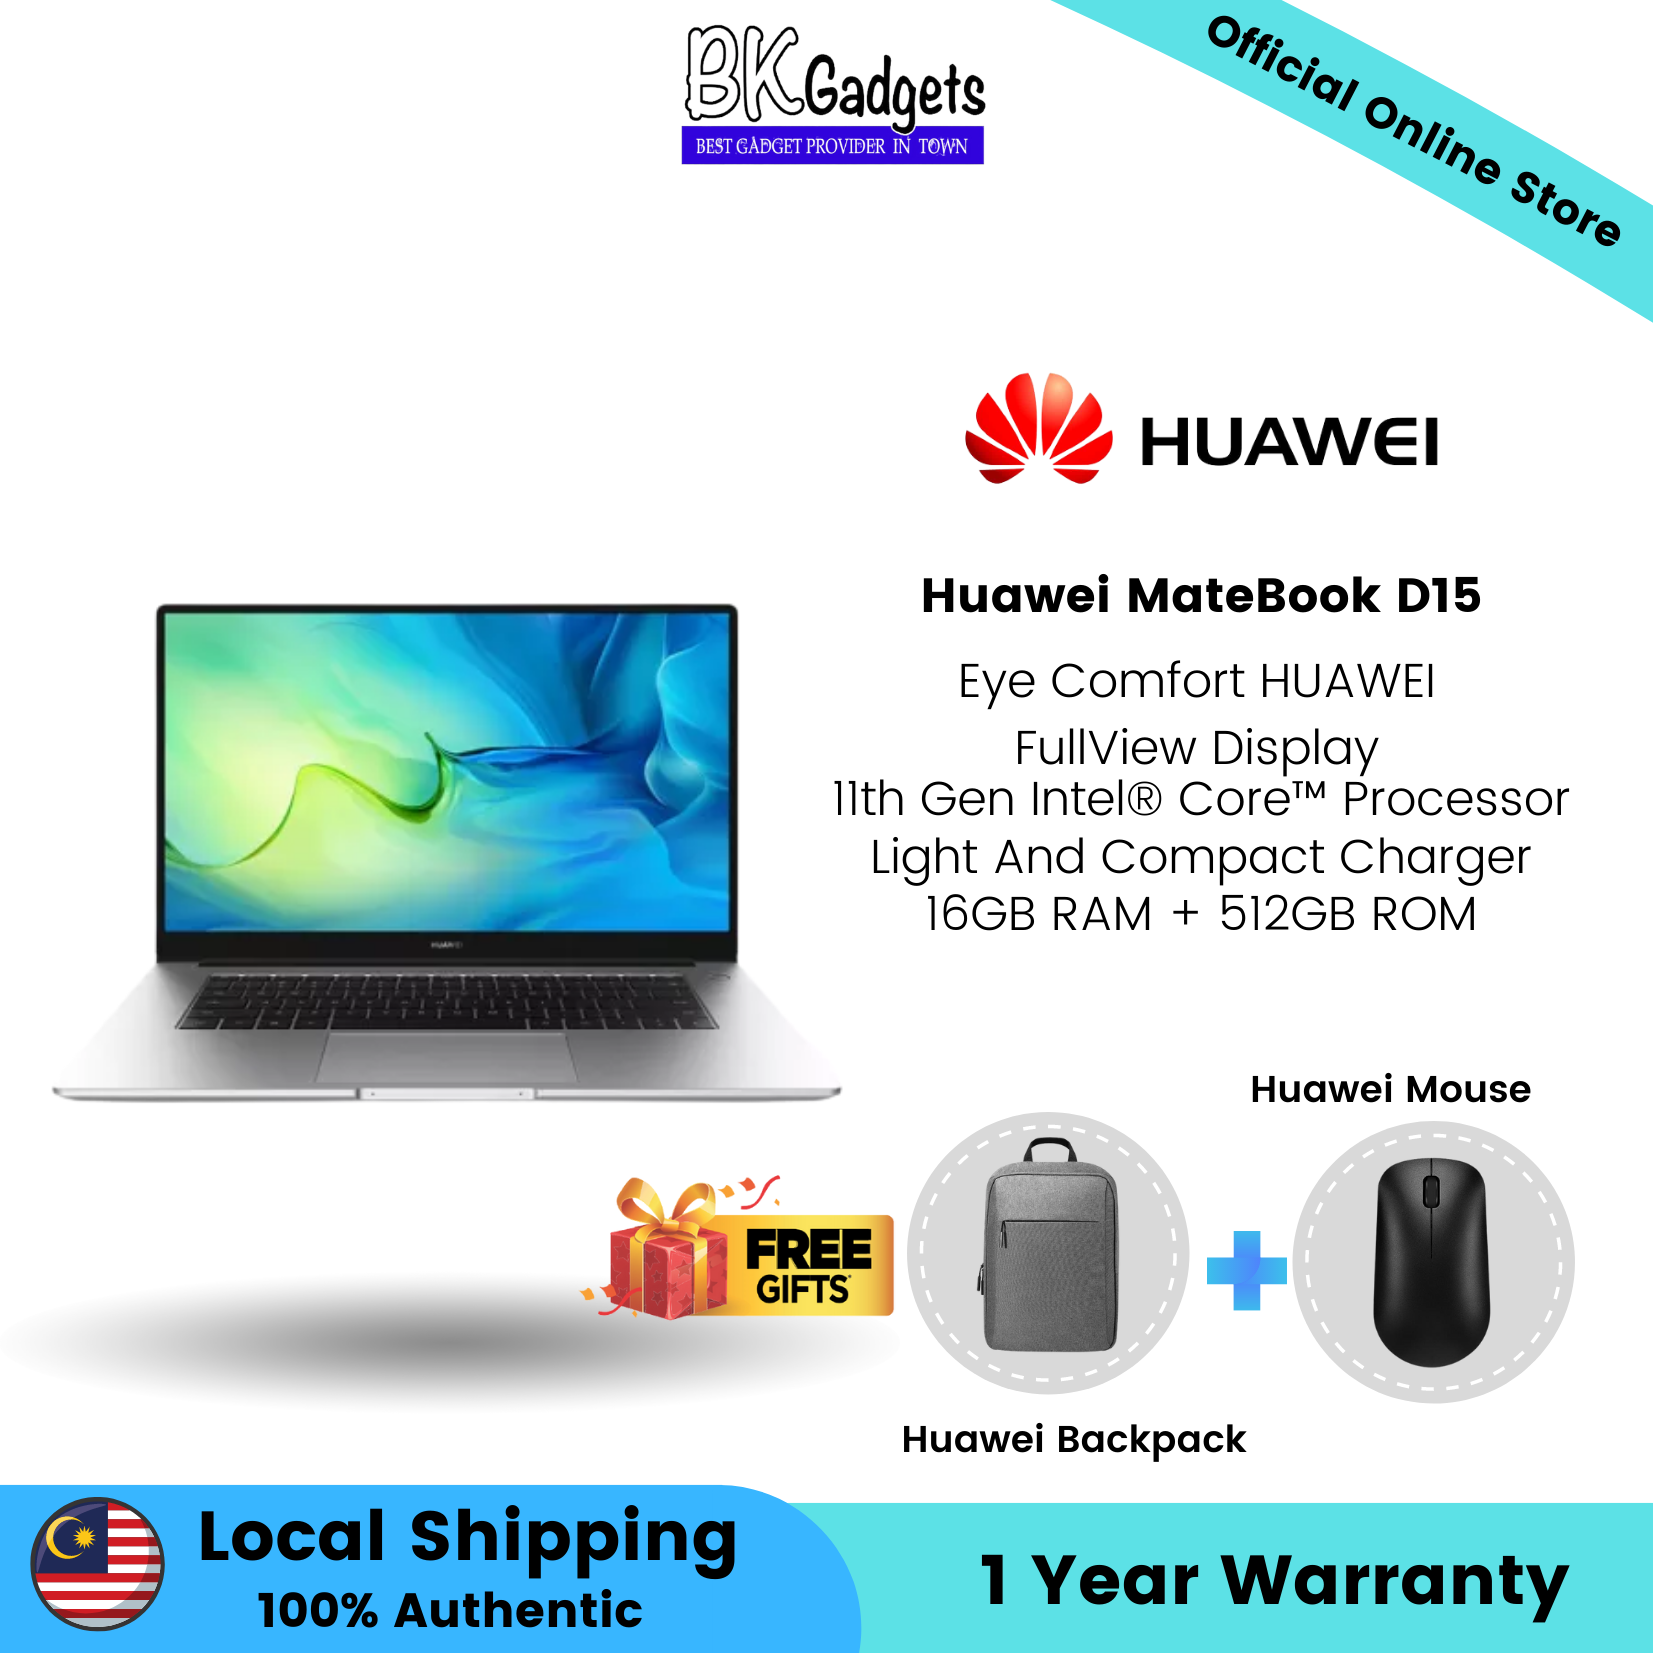 Huawei MateBook D15 - 16GB RAM + 512GB ROM  11th Gen Intel Core Processor  Light And Compact Charger